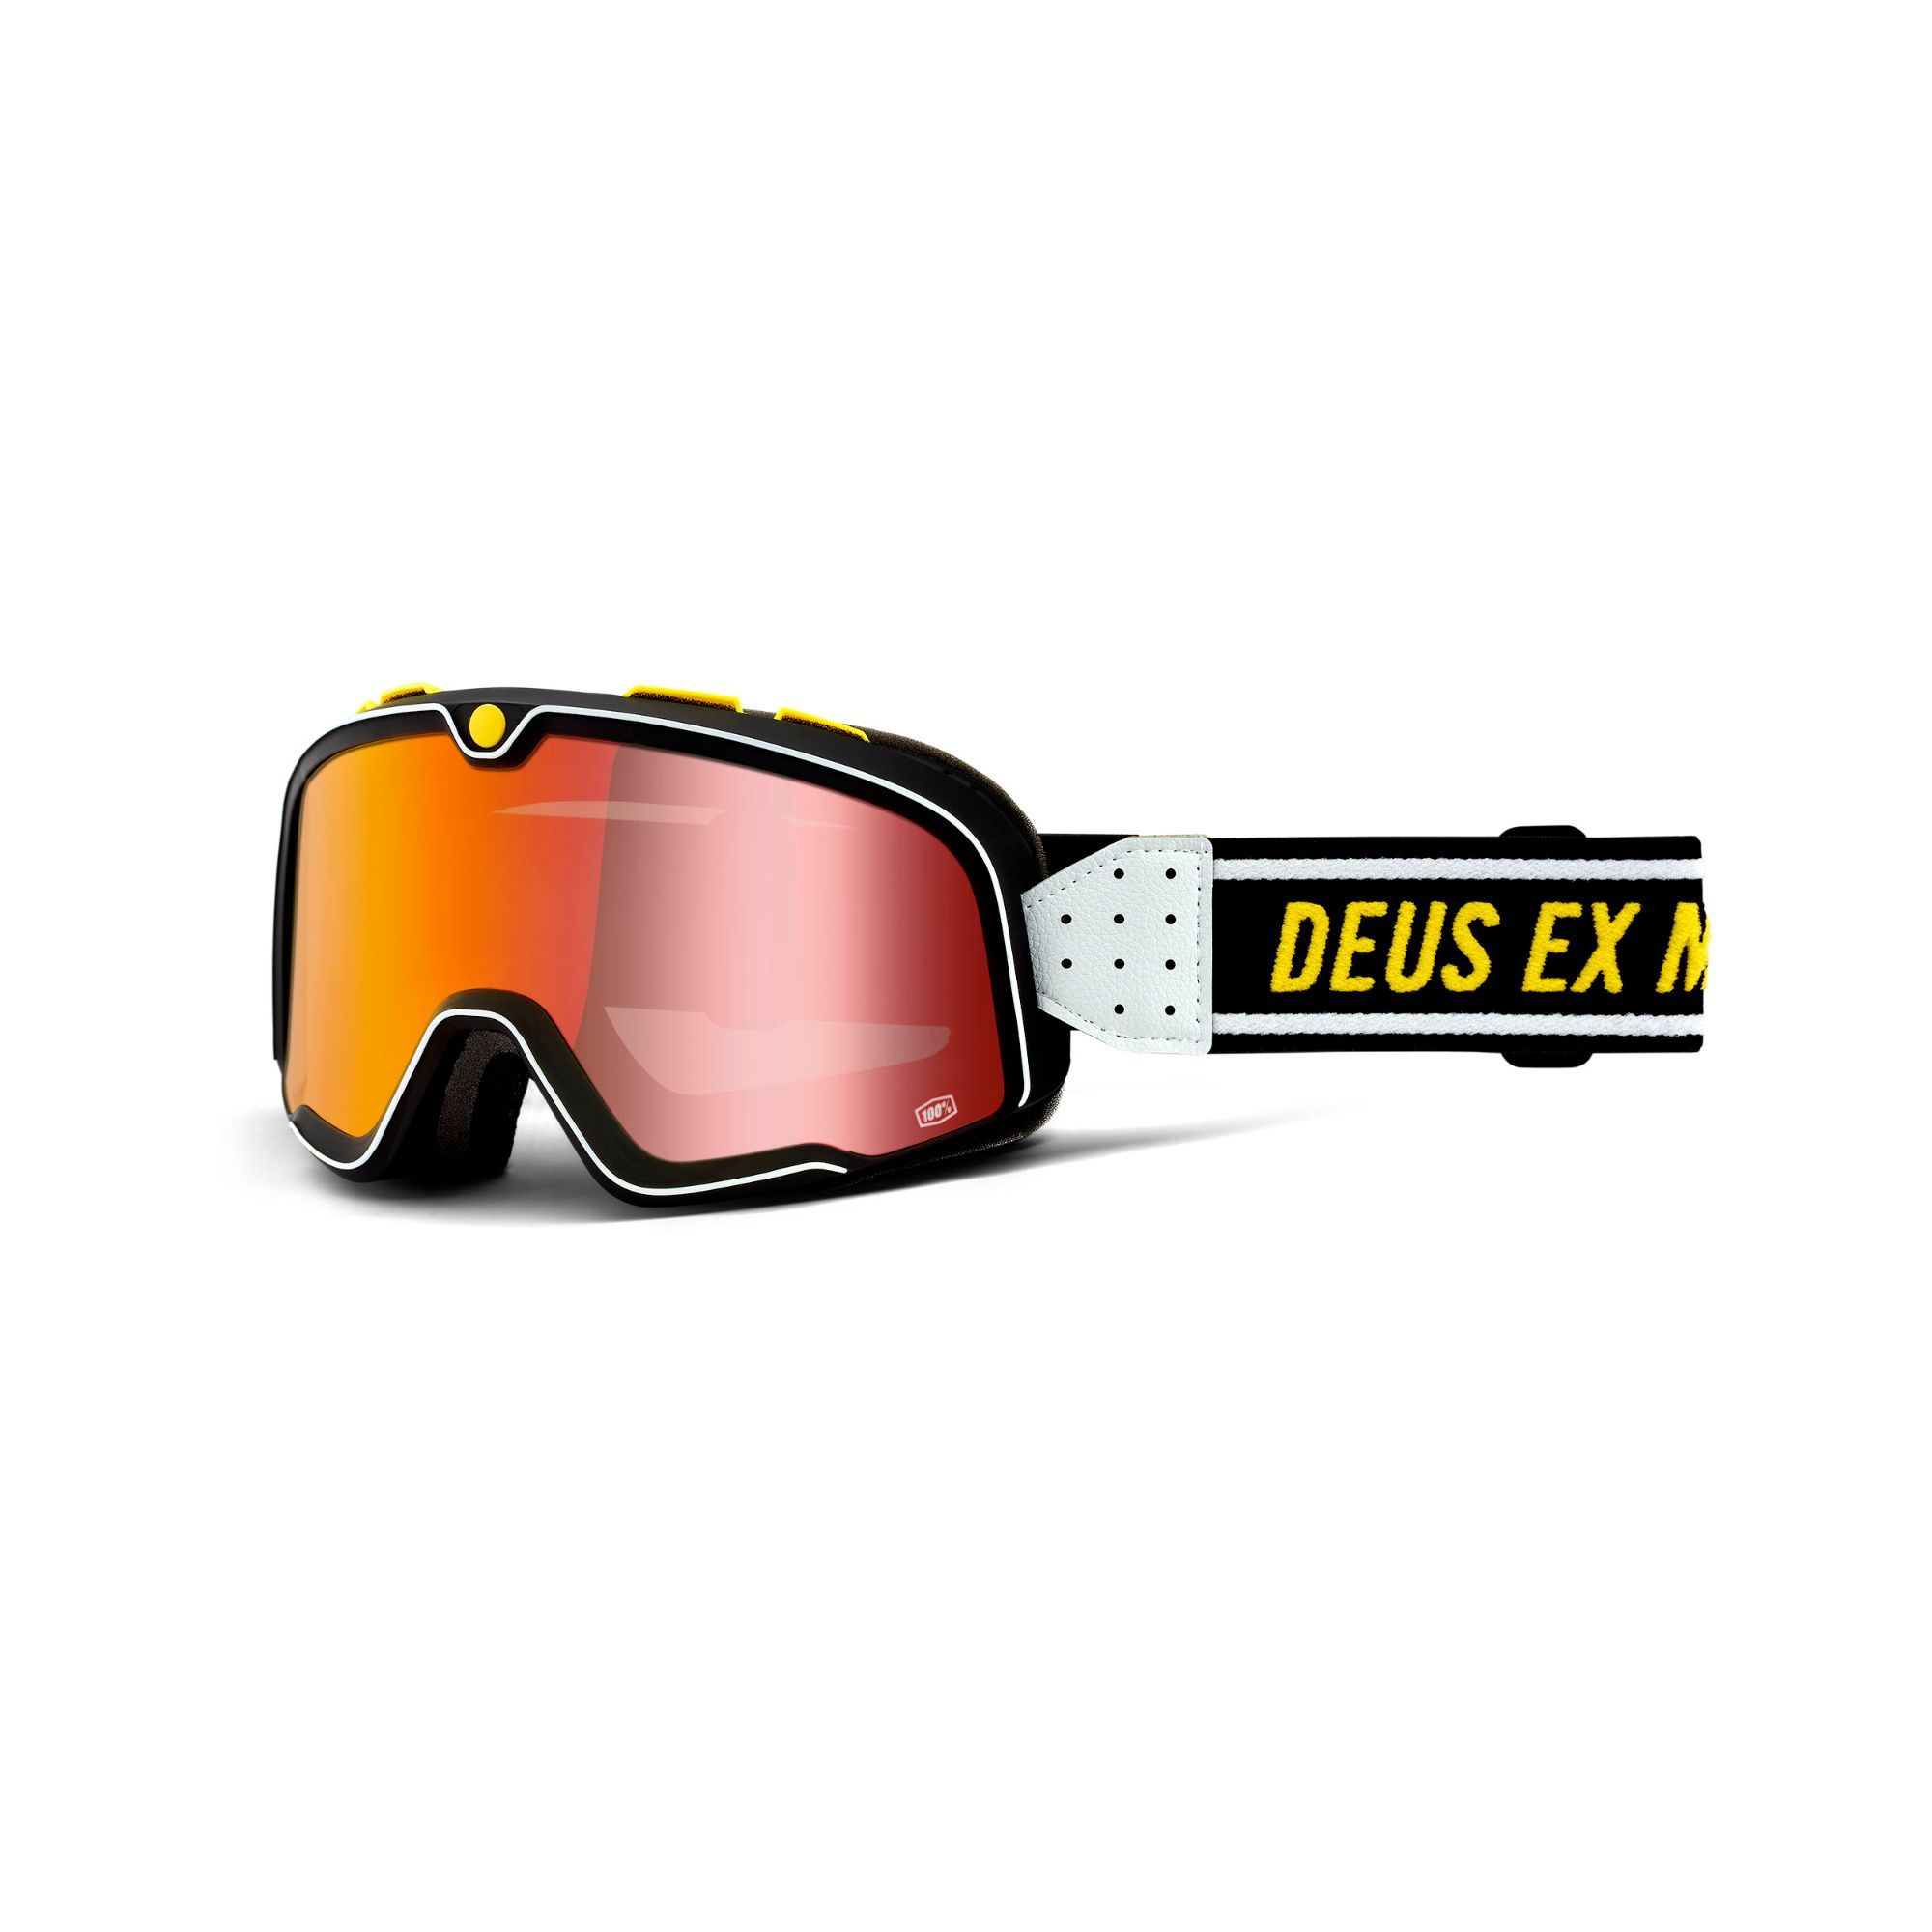 100% Barstow Goggles Deus/red Mirror Lens 2021 - £67.49 | Goggles